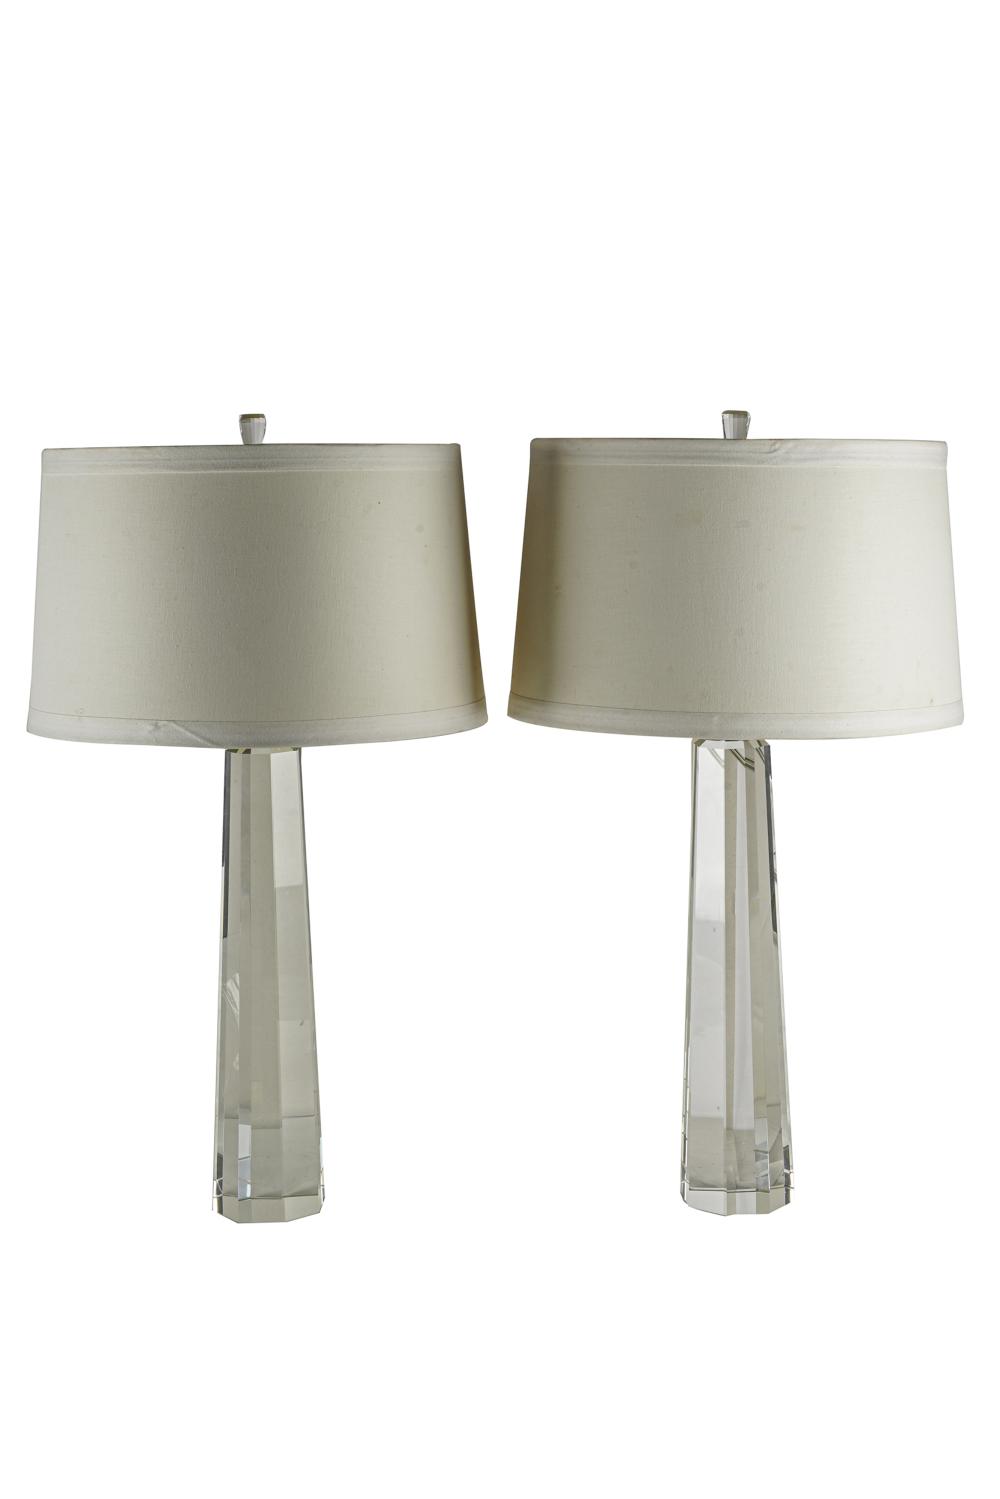 PAIR OF MODERN GLASS TABLE LAMPSCondition  33351f